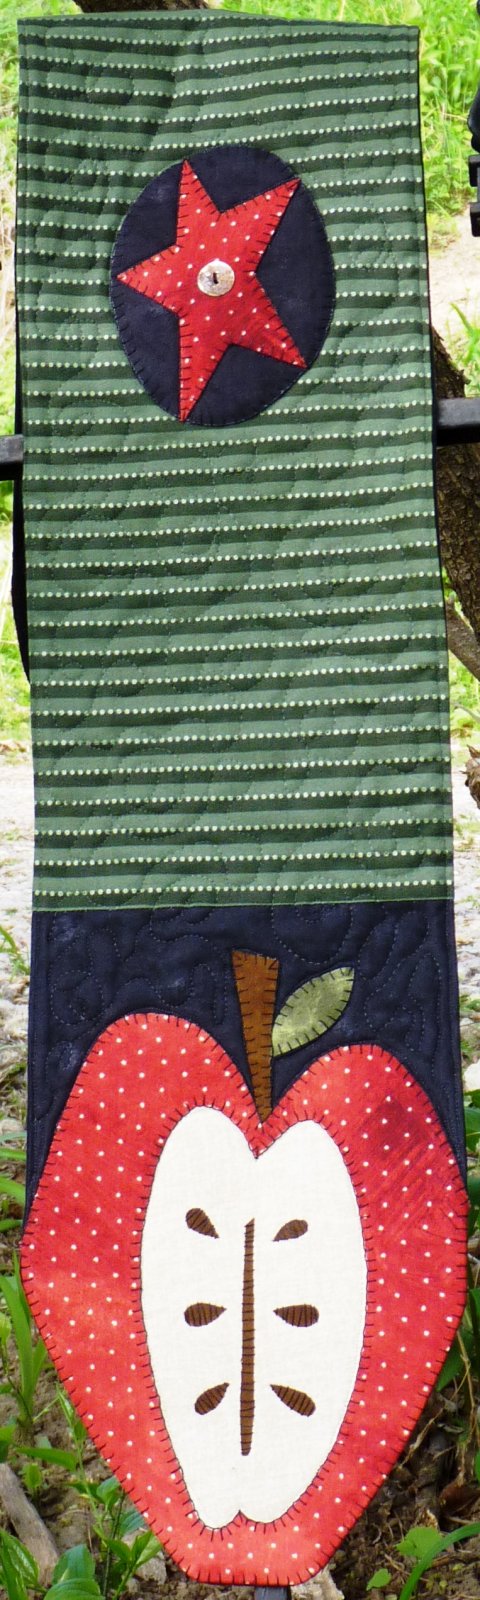 Apple to Apple 2 Quilt Pattern by Bloomin Minds